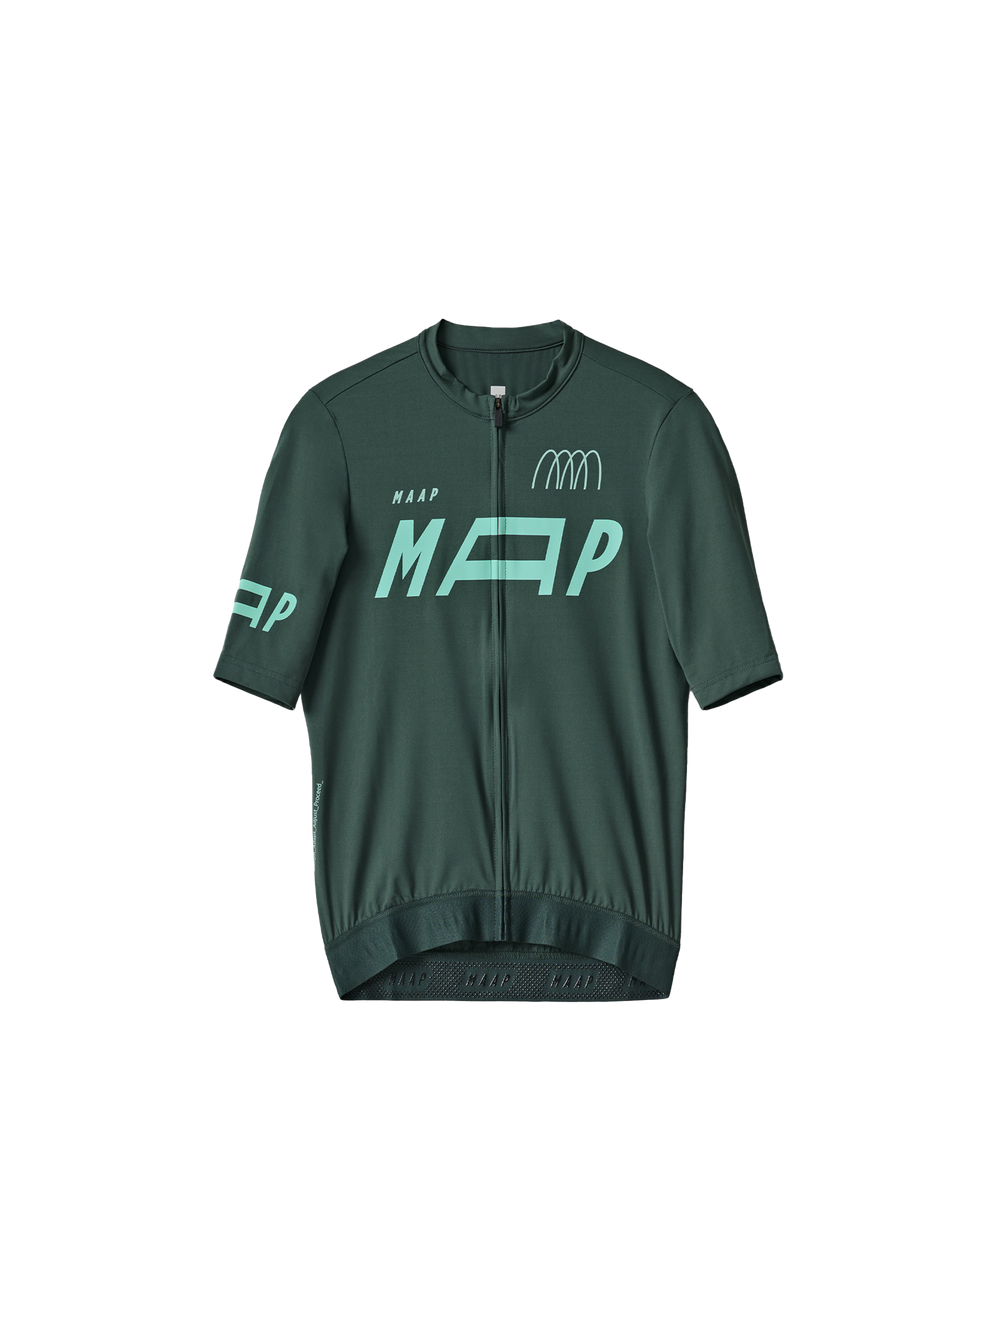 Product Image for Women's Adapt Jersey